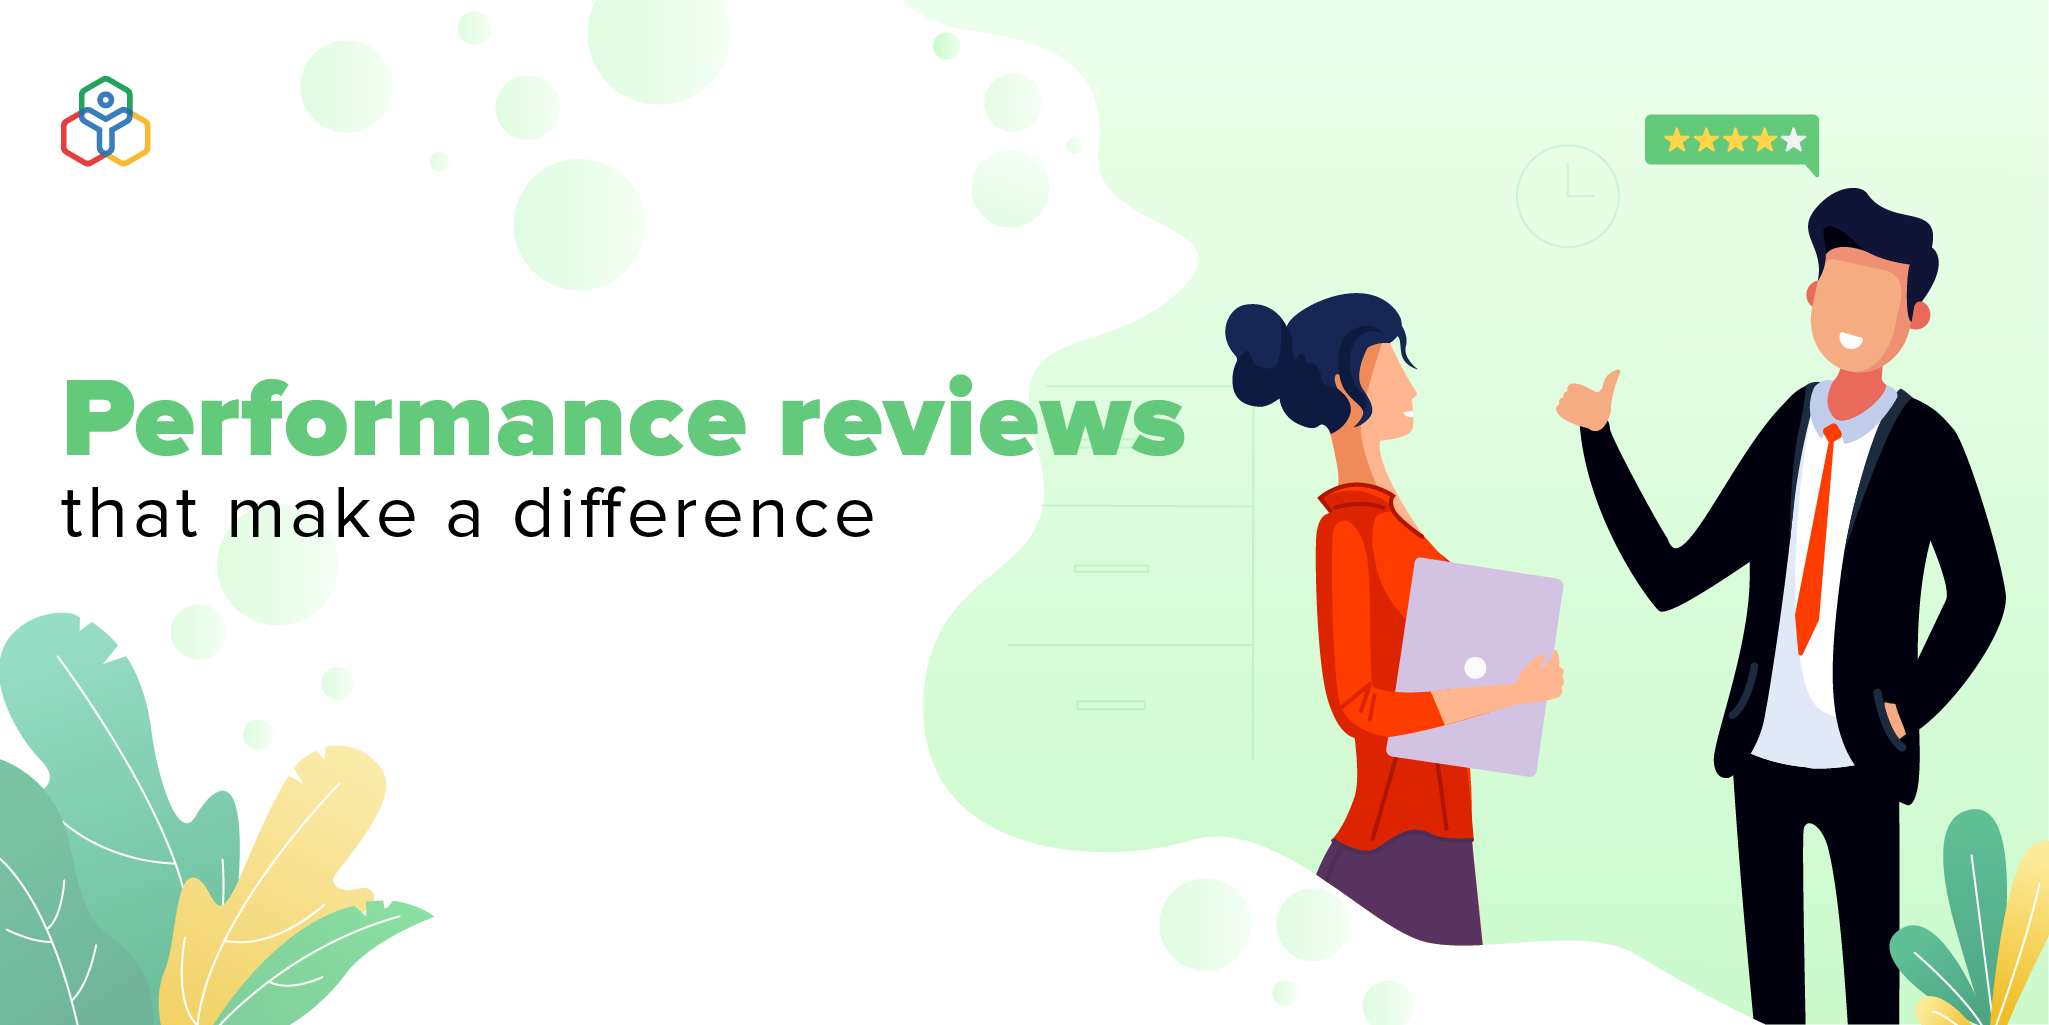 A manager's guide to delivering effective performance reviews